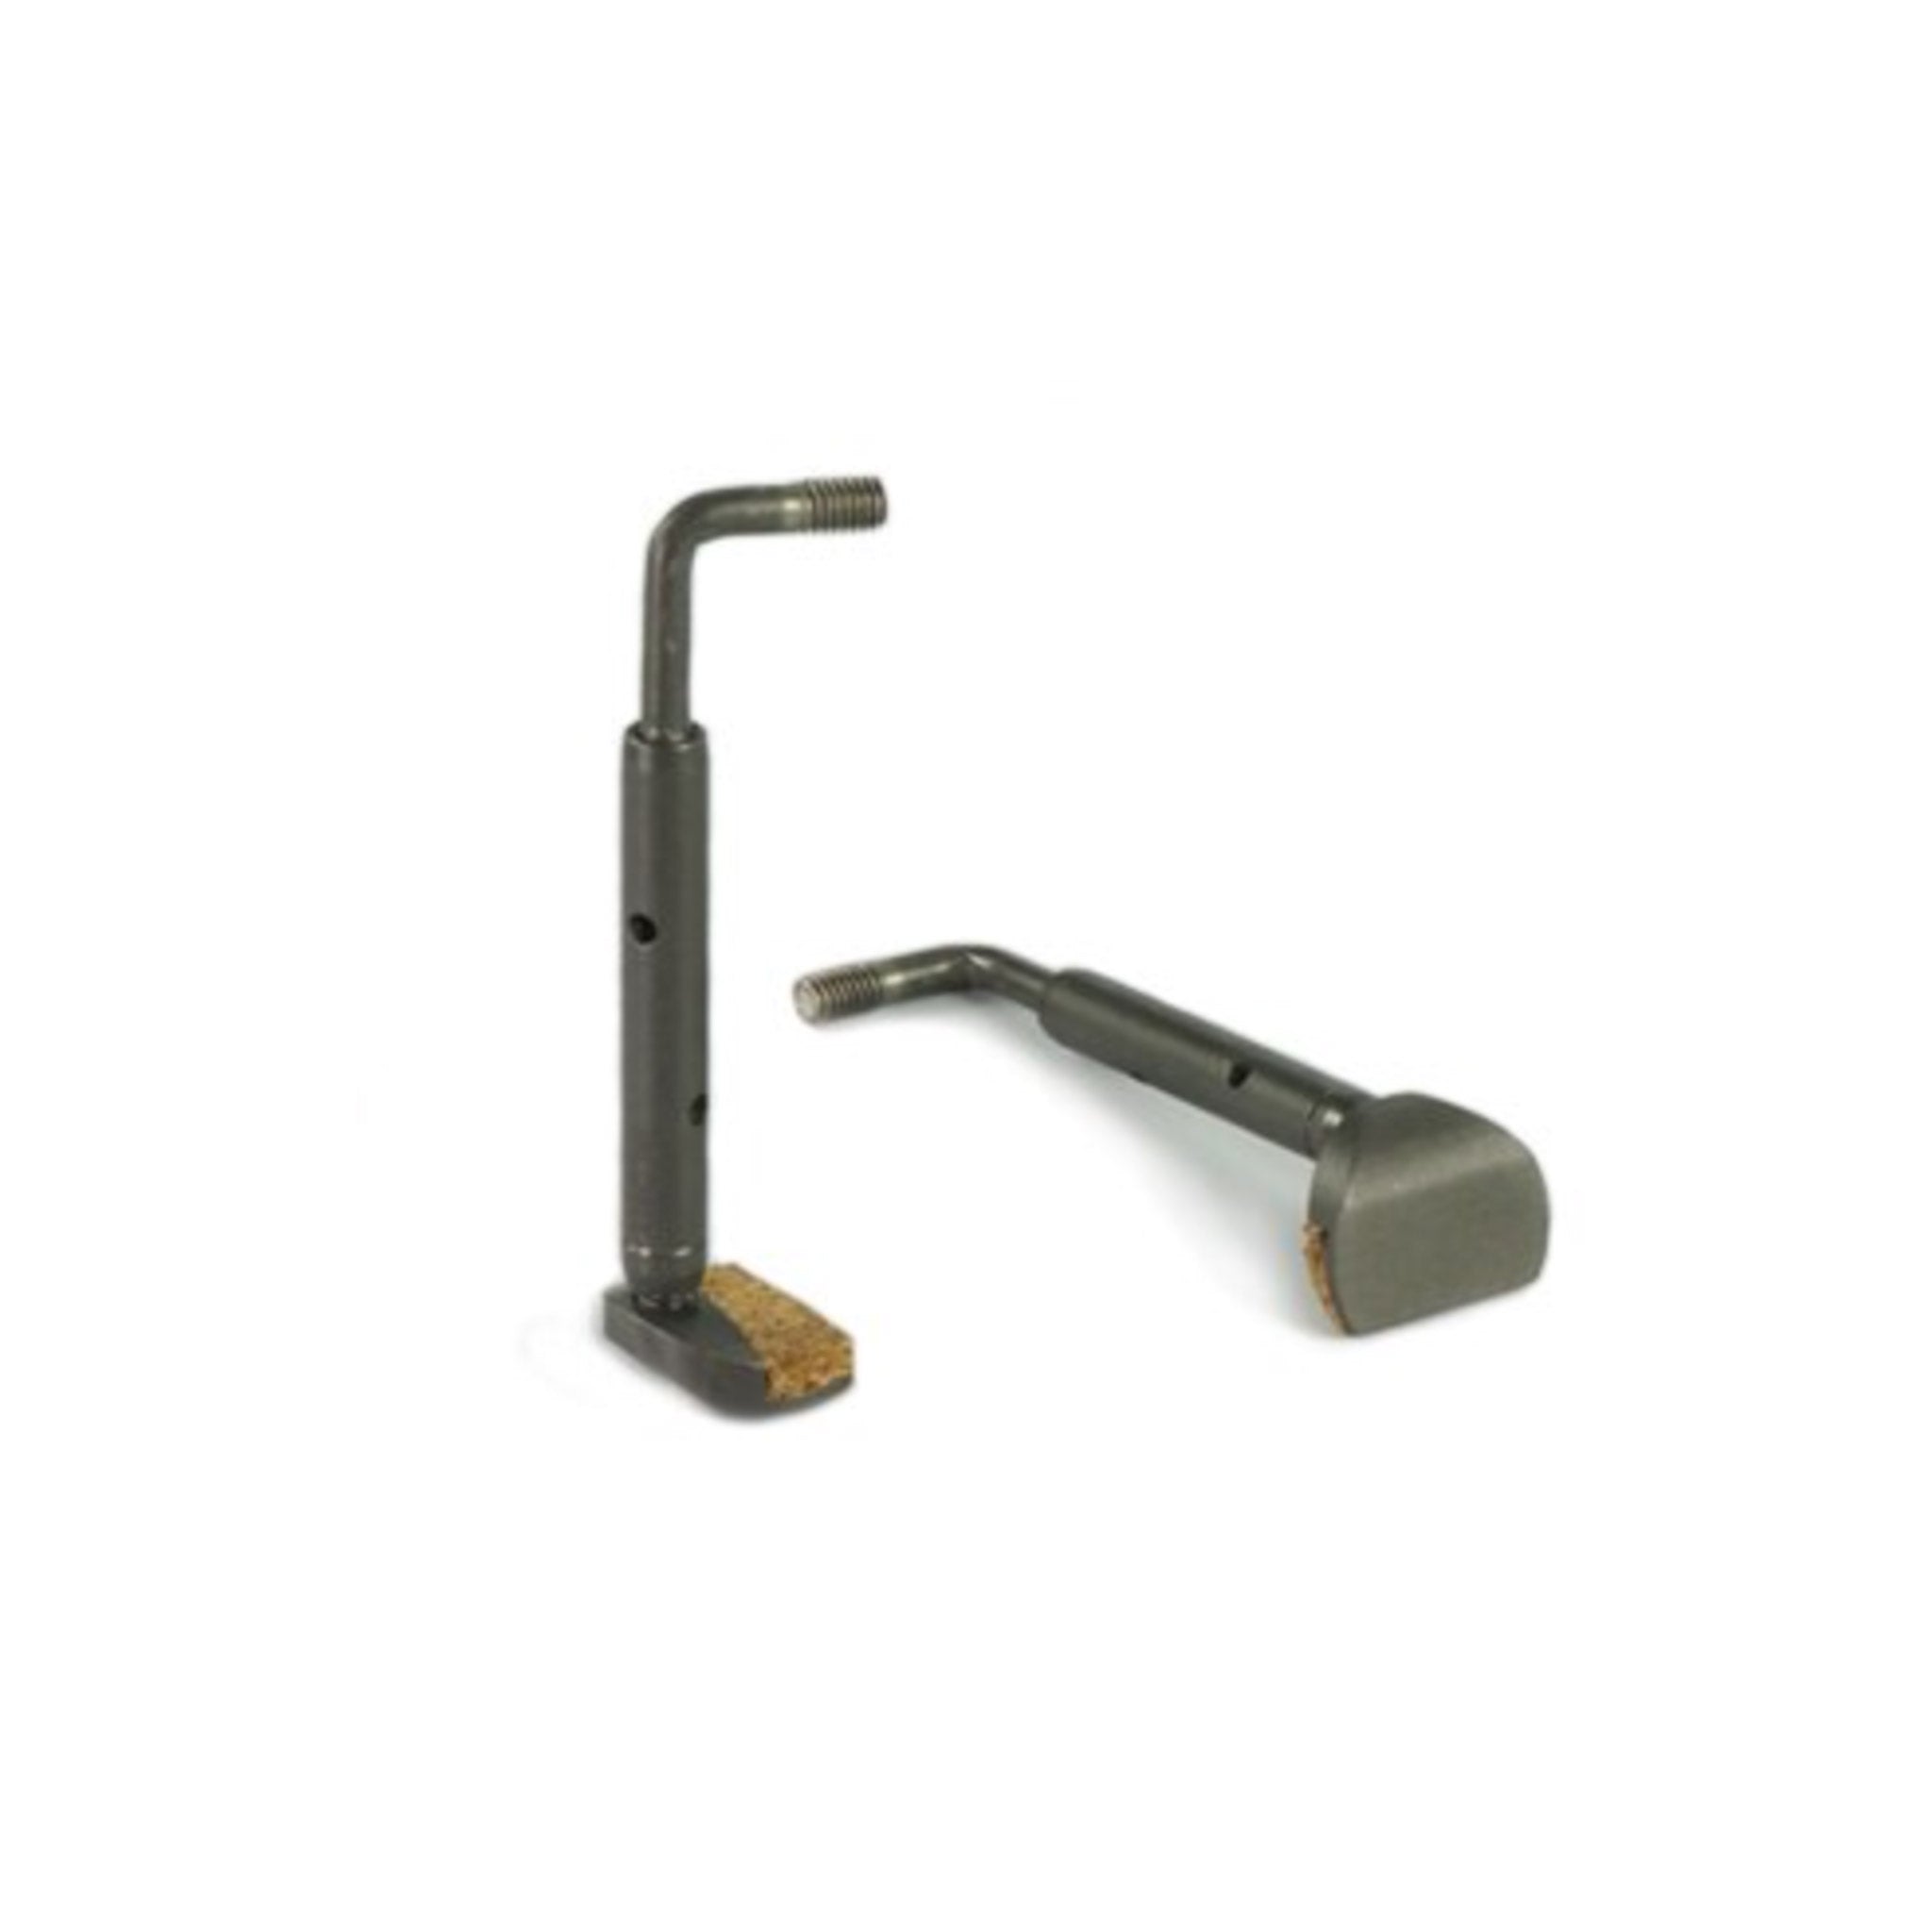 Stradpet Titanium Hook Hardware Replacement for Chinrest - Universal Separated Leg Design